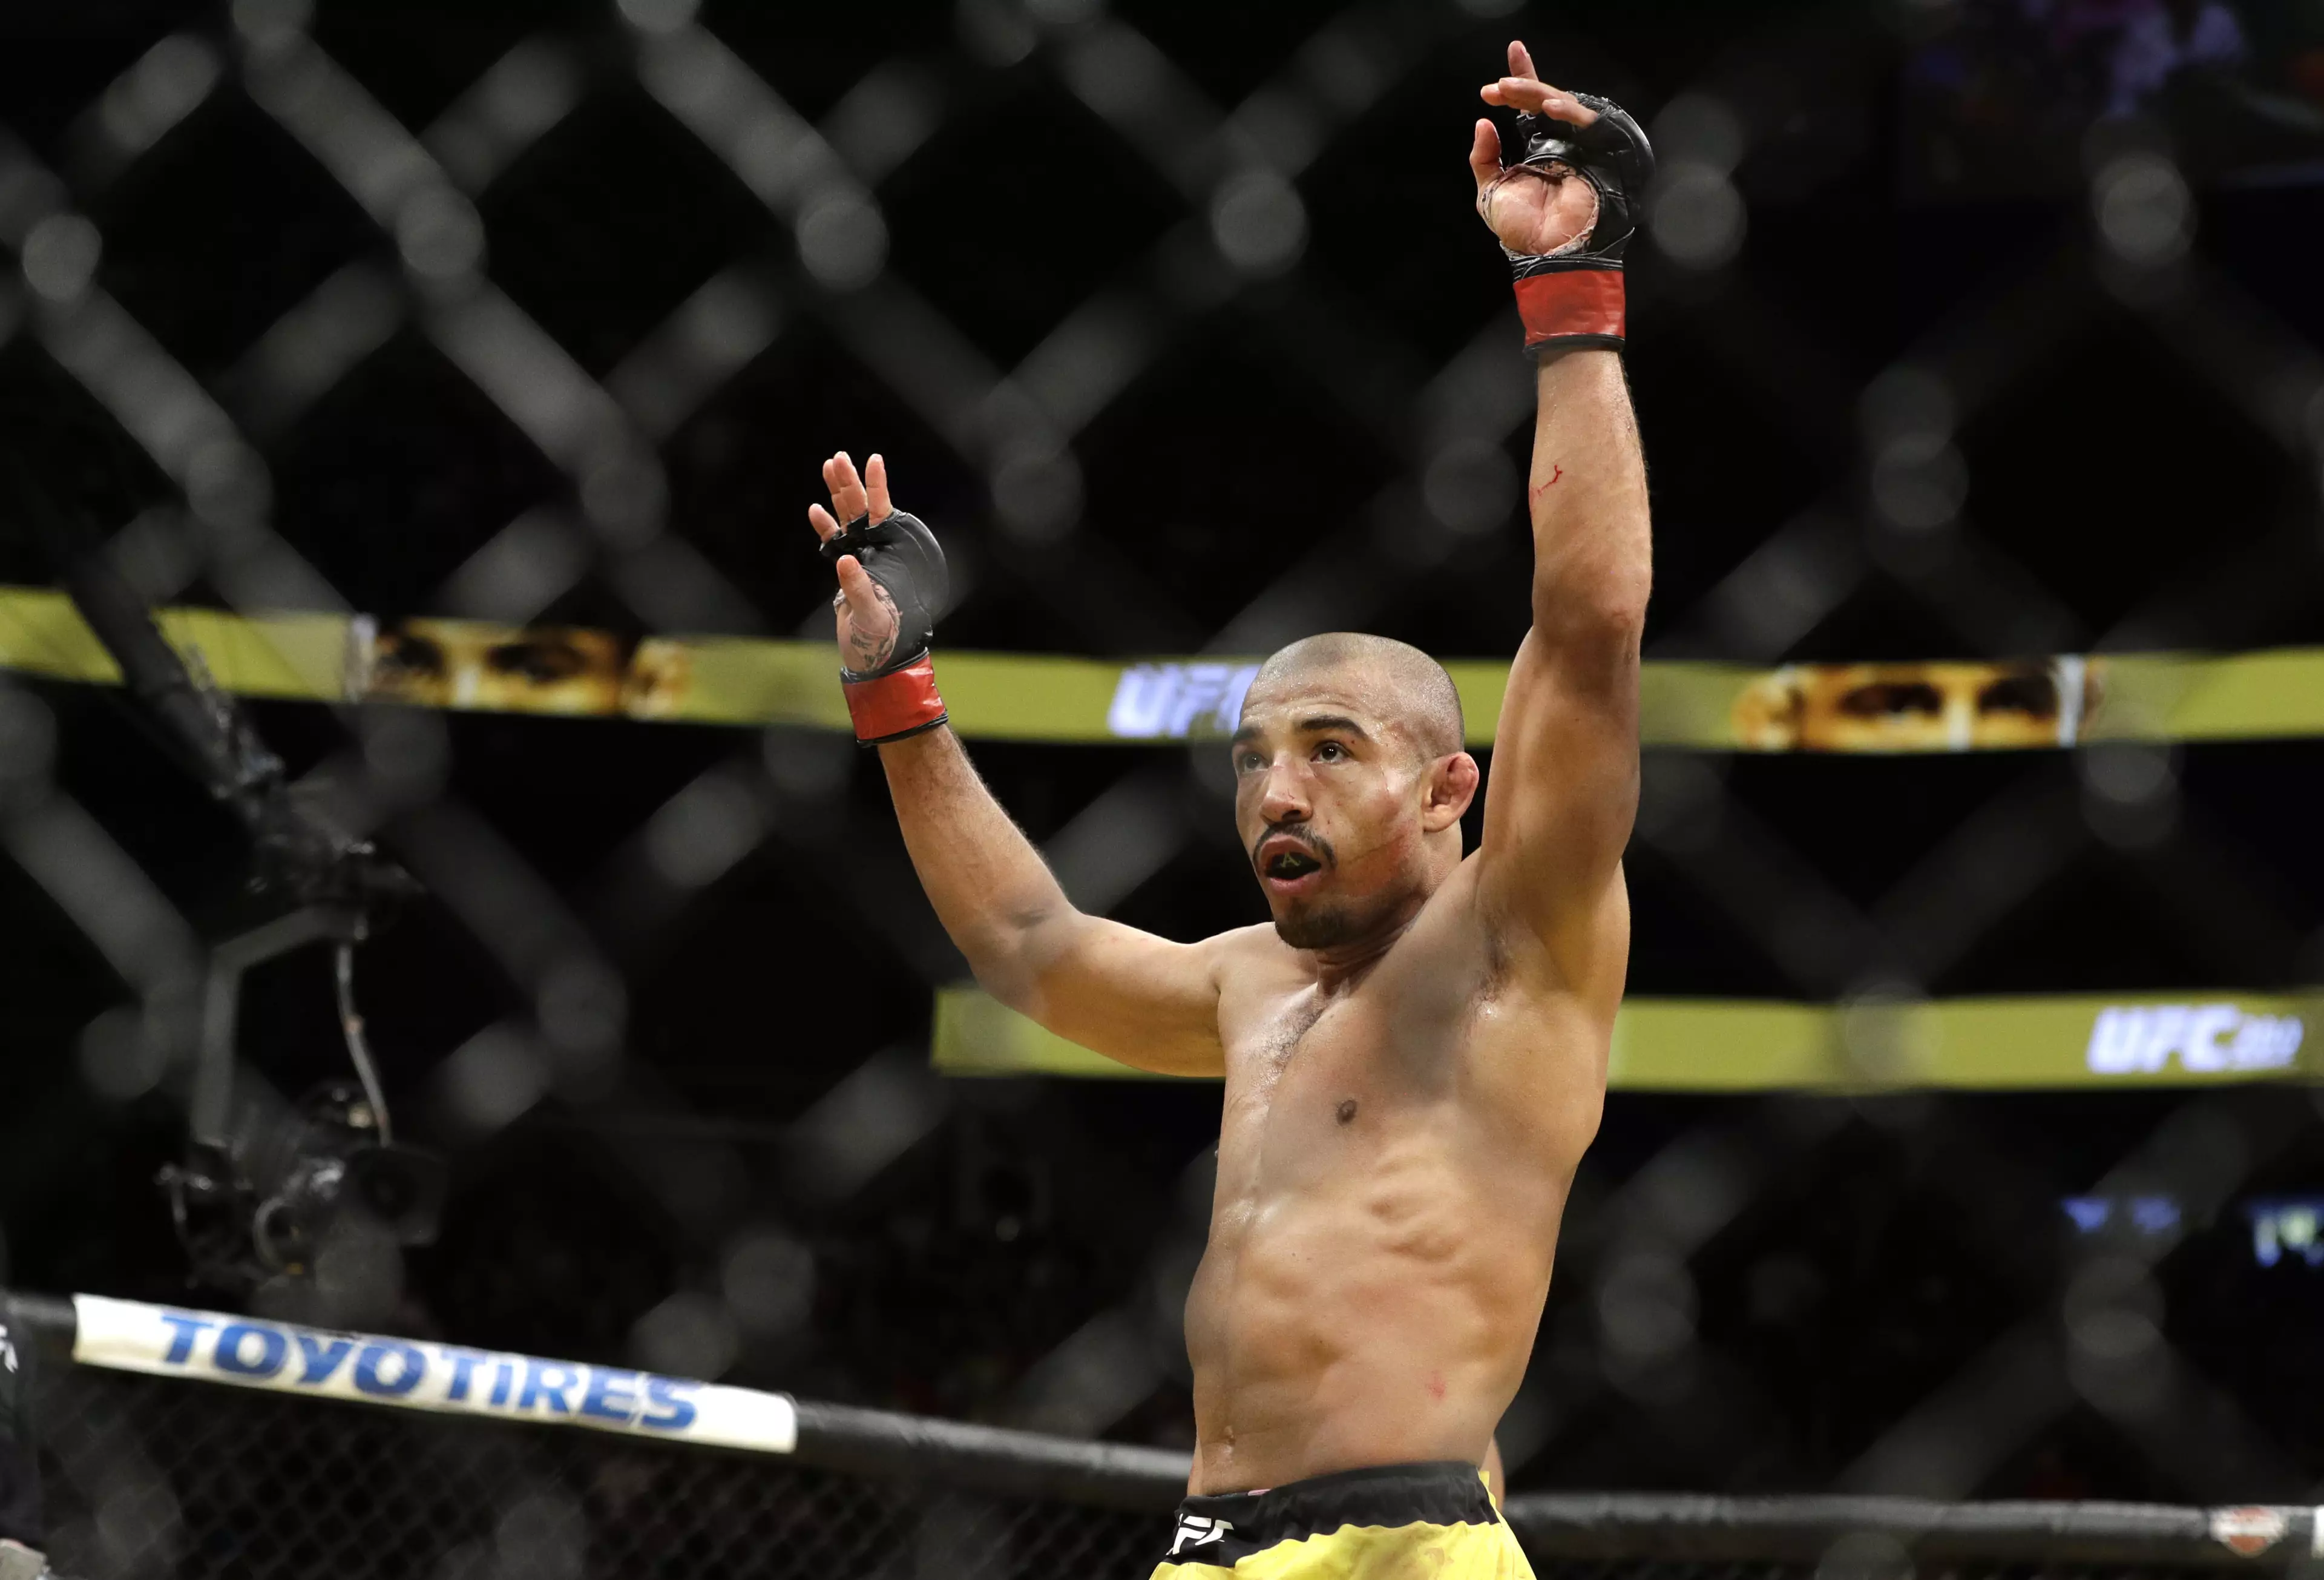 Jose Aldo Claims He Had Spies In Frankie Edgar's Training Room At UFC 200